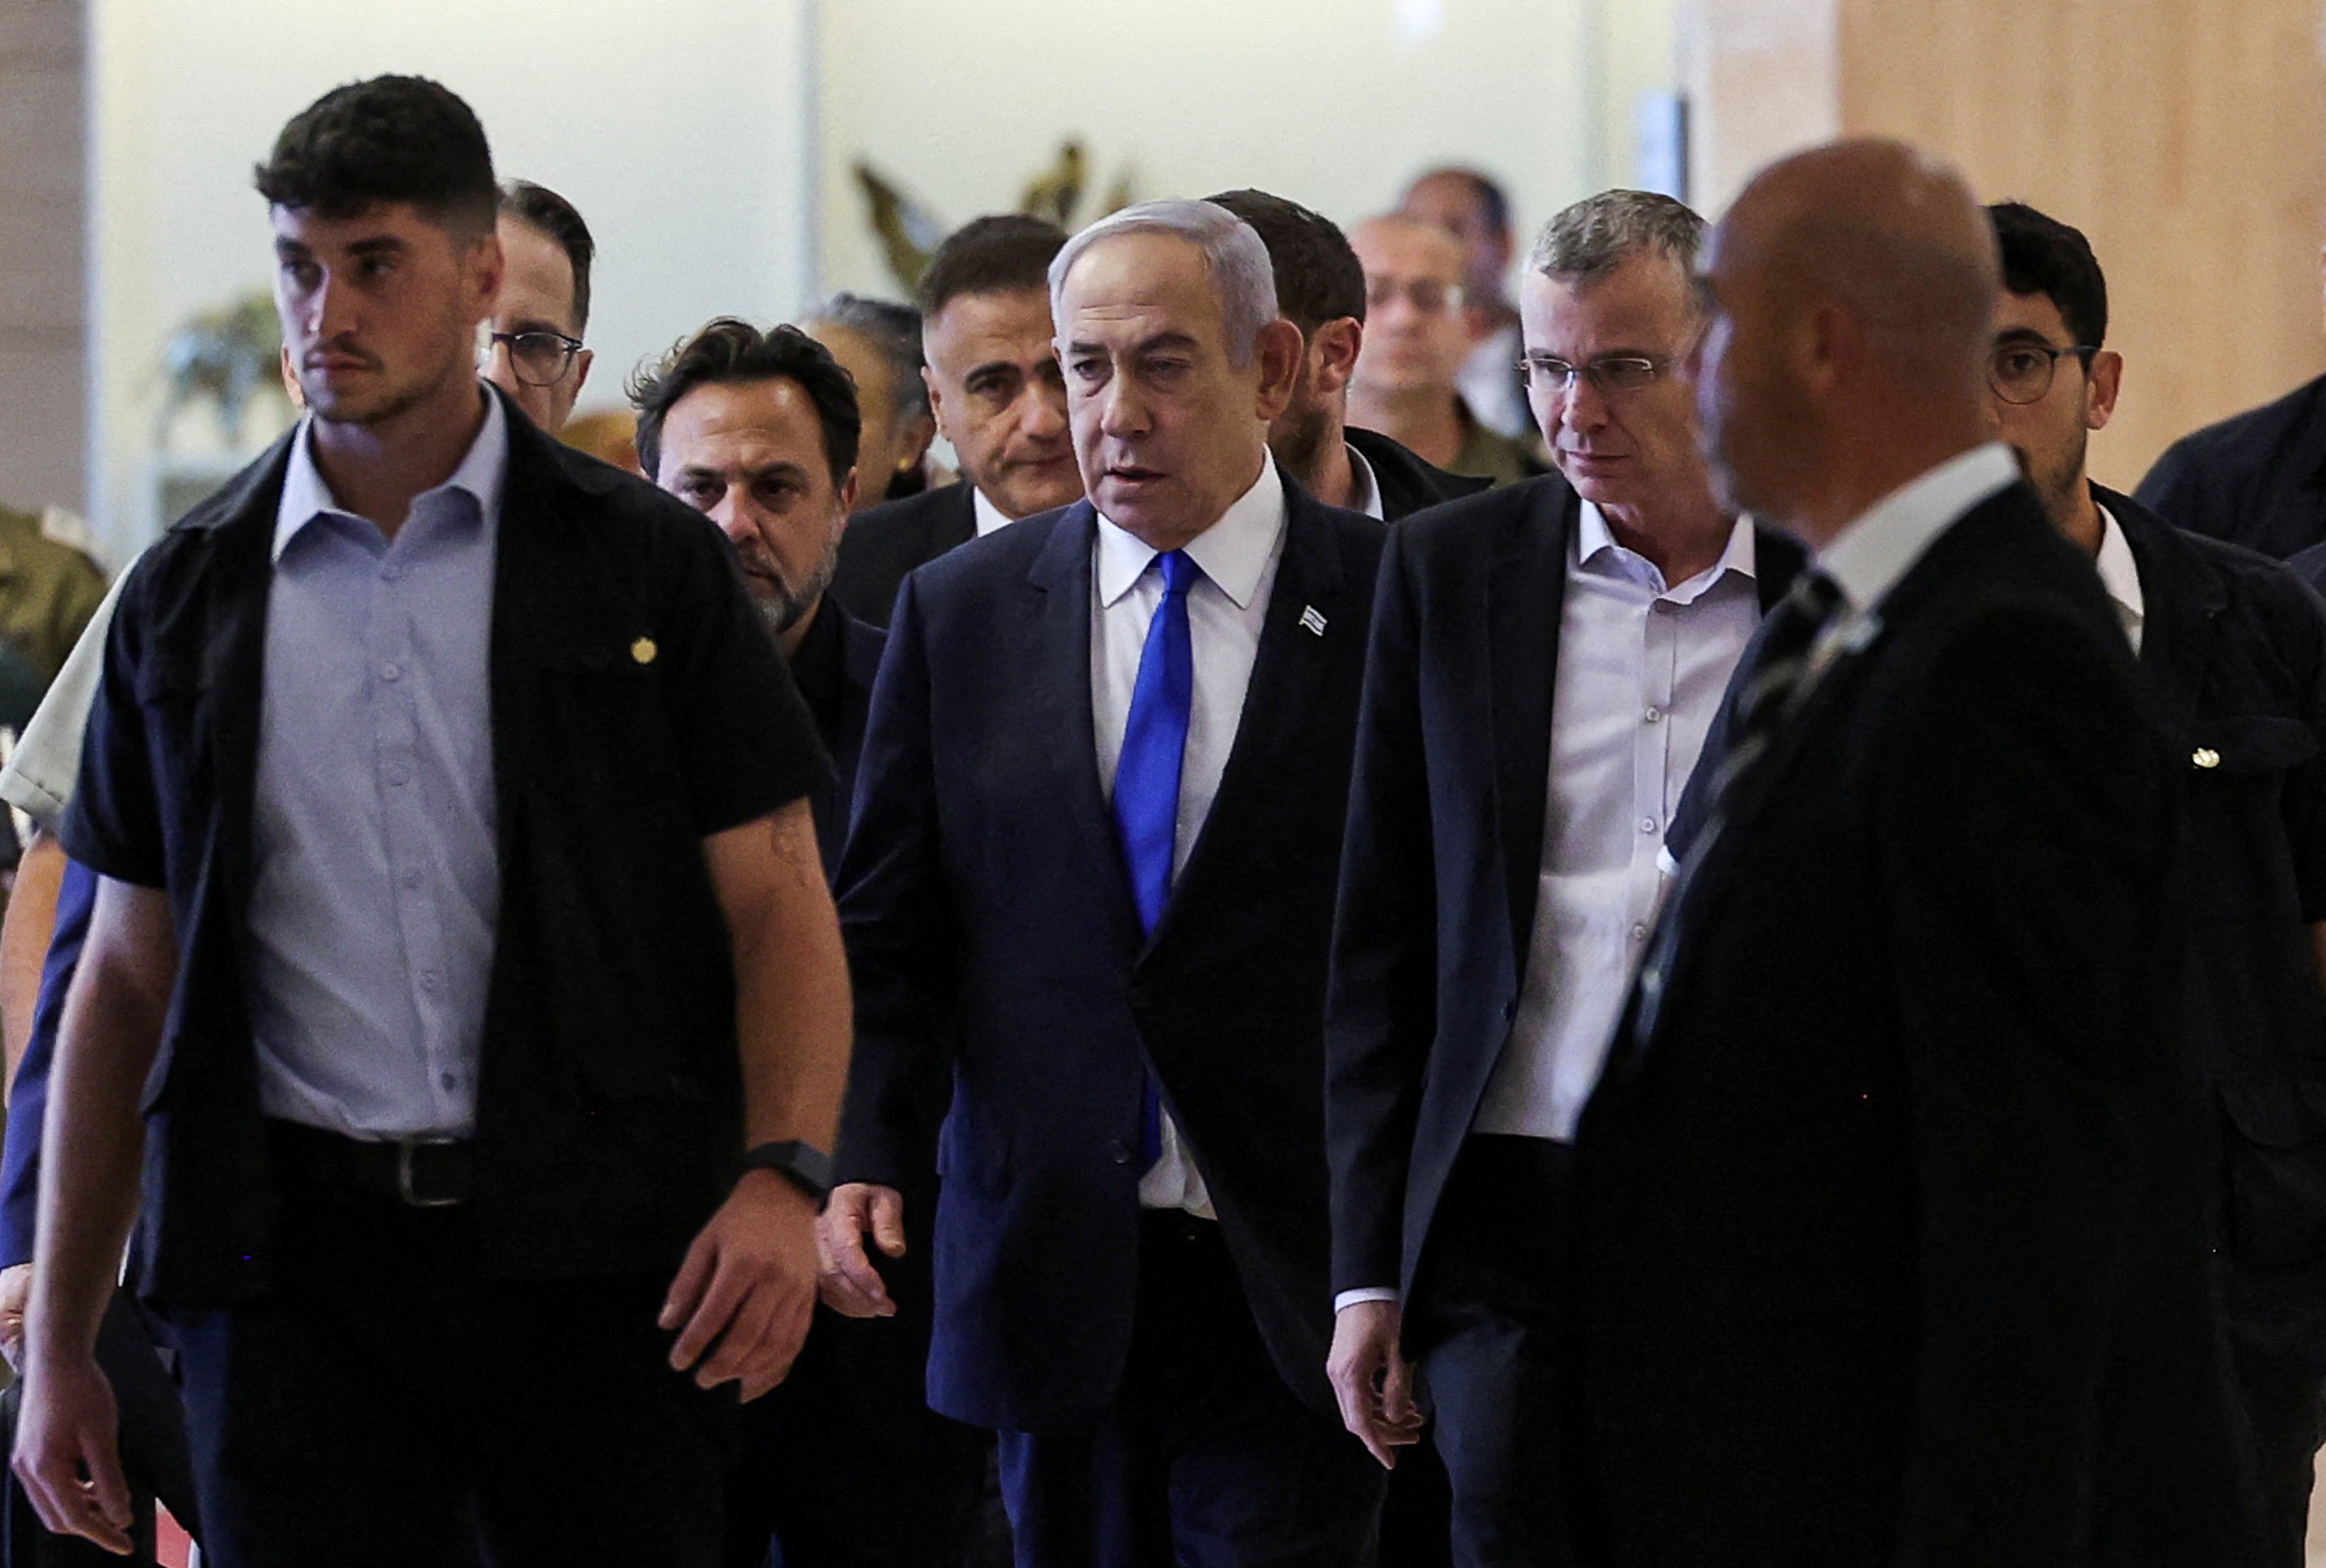 Israeli prime minister Benjamin Netanyahu arrives to his Likud party faction meeting at the Knesset, Israel’s parliament, after the ICC motion was made public